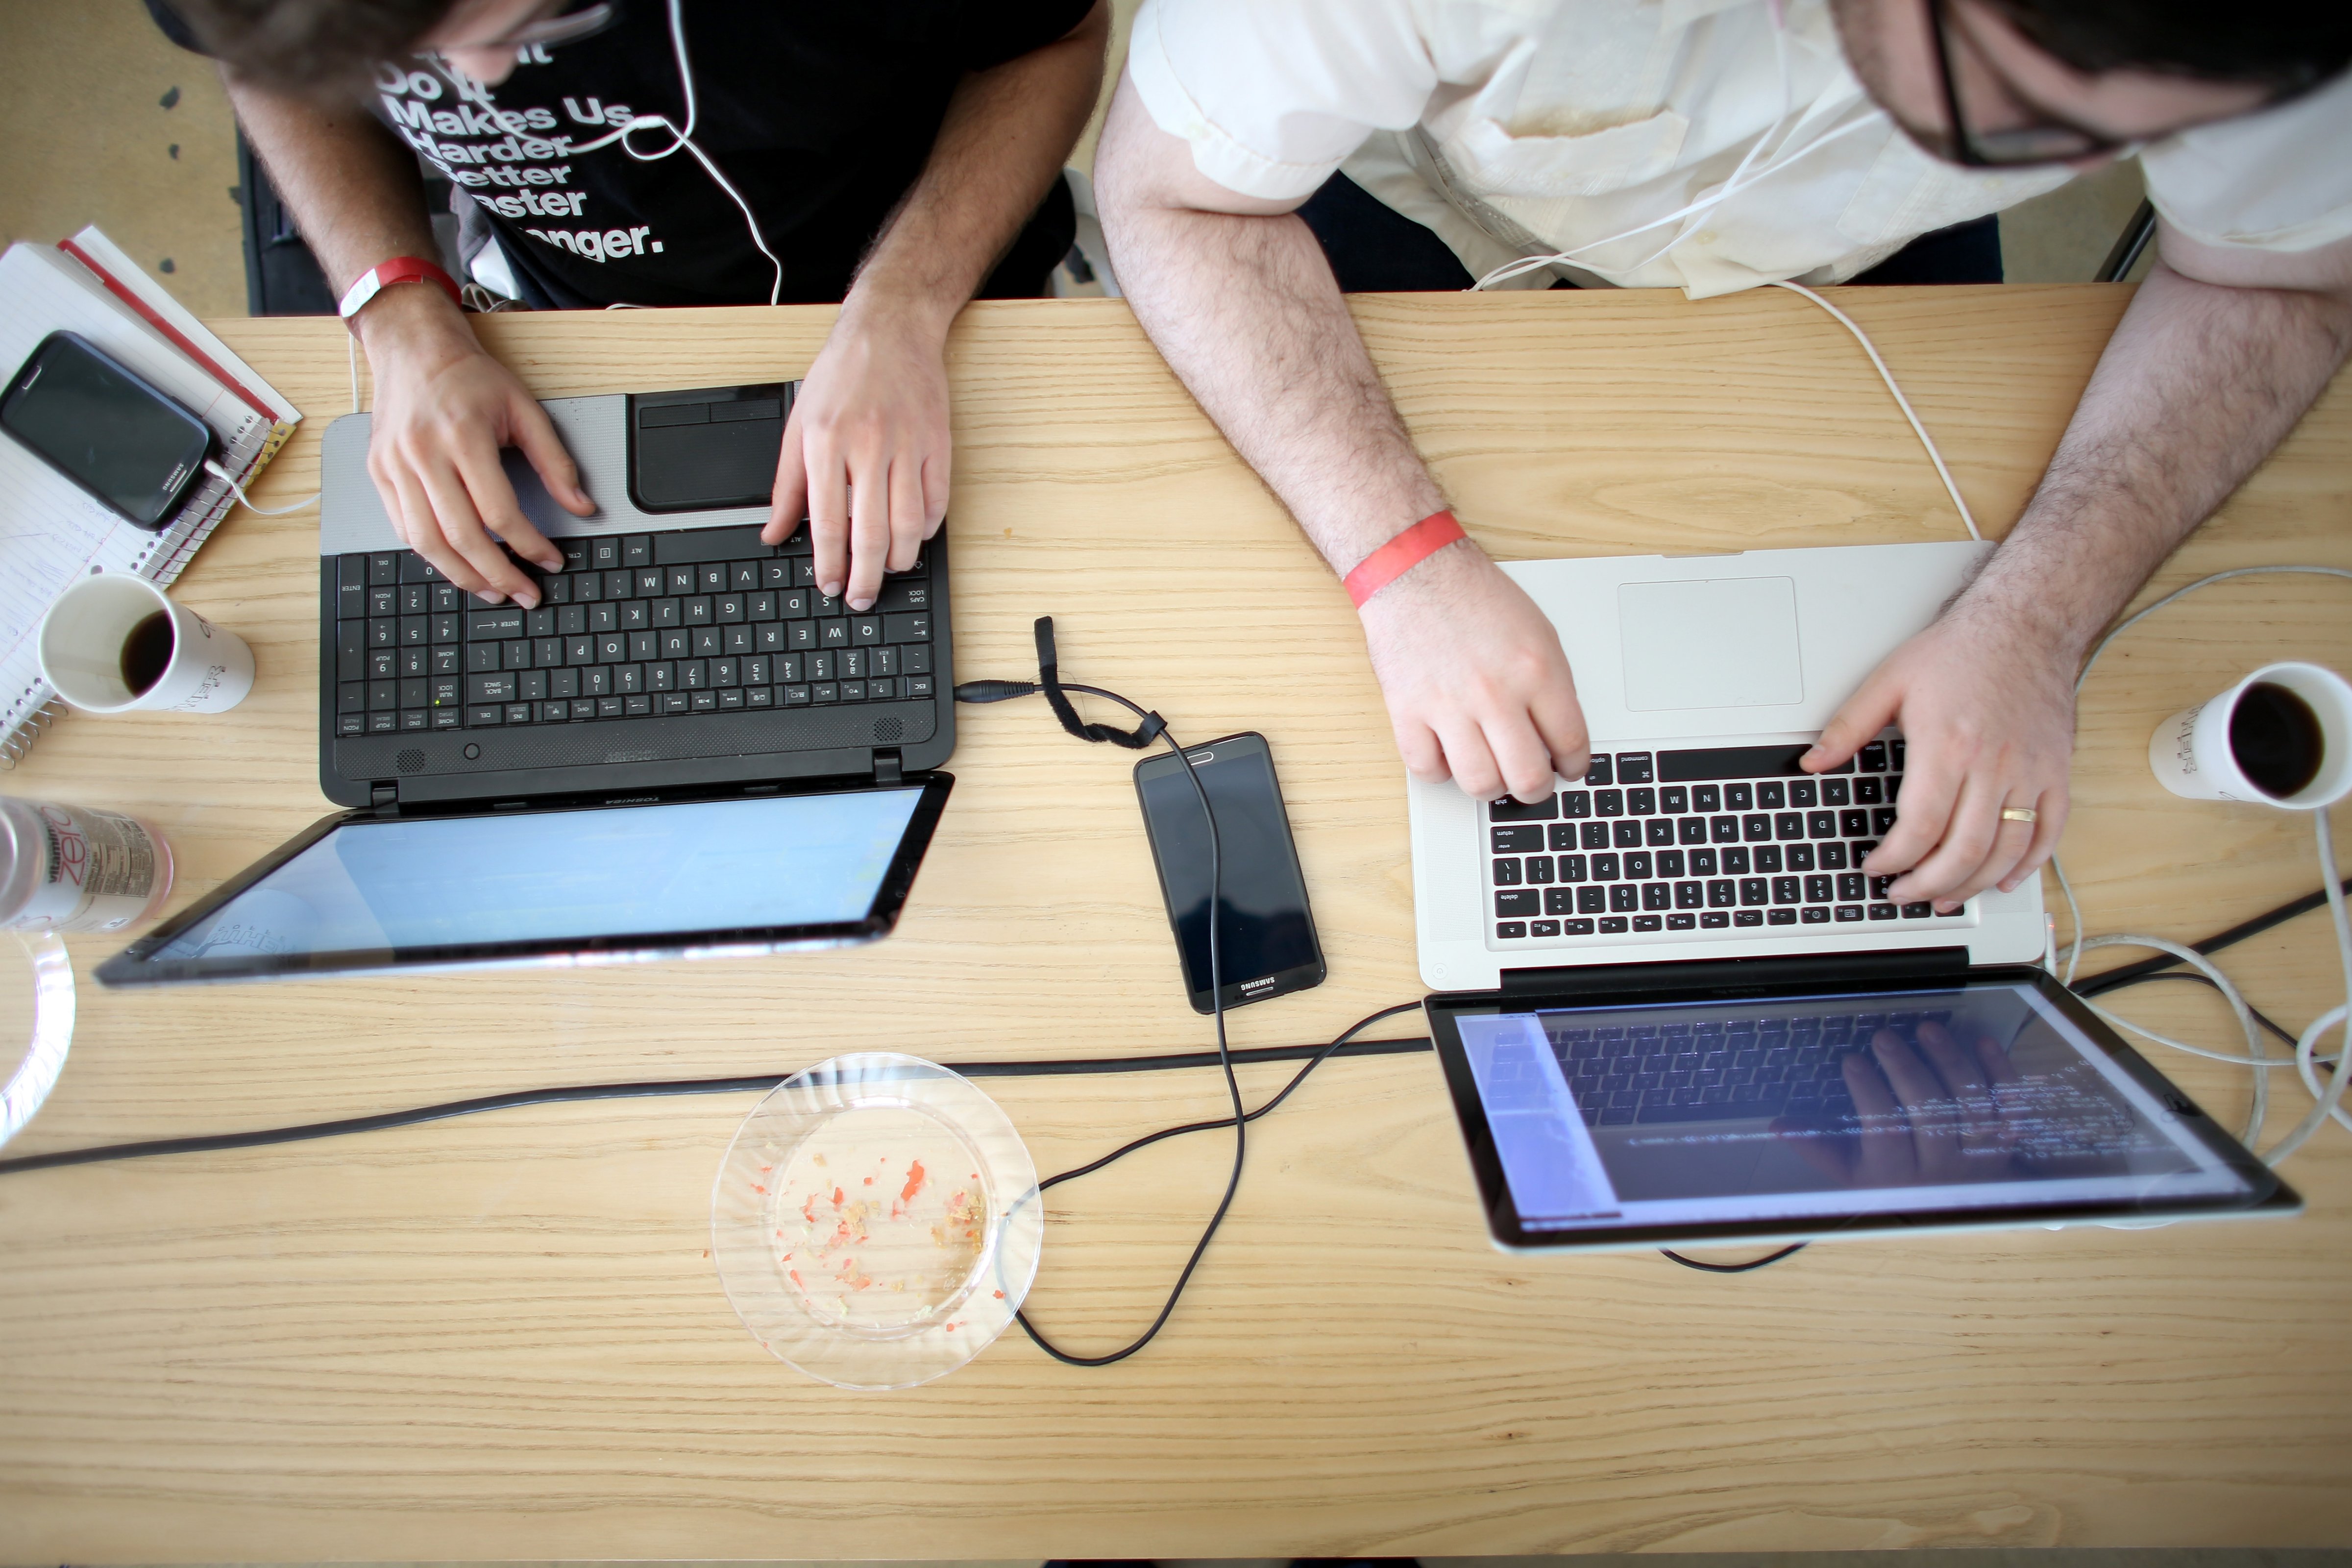 Miguel Chateloin  (L) and Lazaro Gamio (R) use their computers to write code that would allow people living in Cuba to use email to post to blogs during the Hackathon for Cuba event on Febr. 1, 2014 in Miami. (Joe Raedle&mdash;Getty Images)